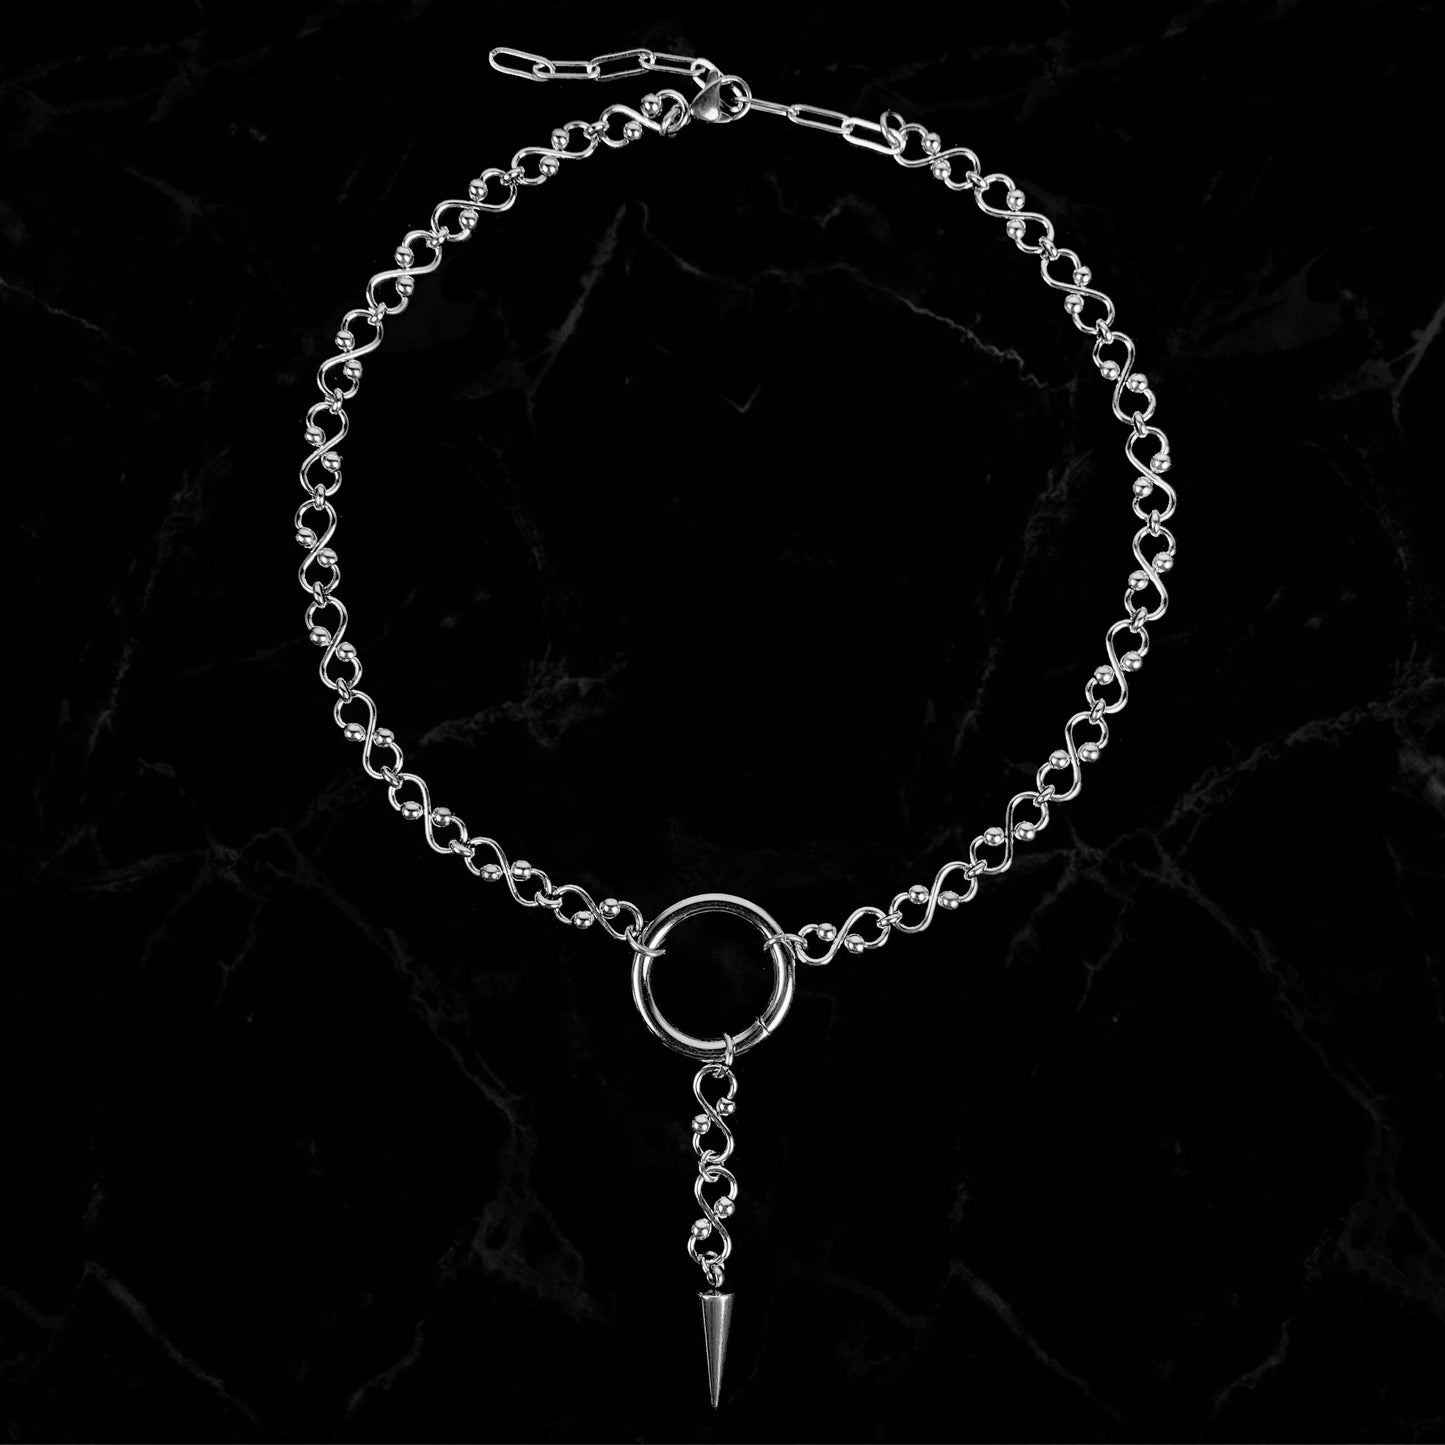 Infinitum Necklace - While Odin Sleeps